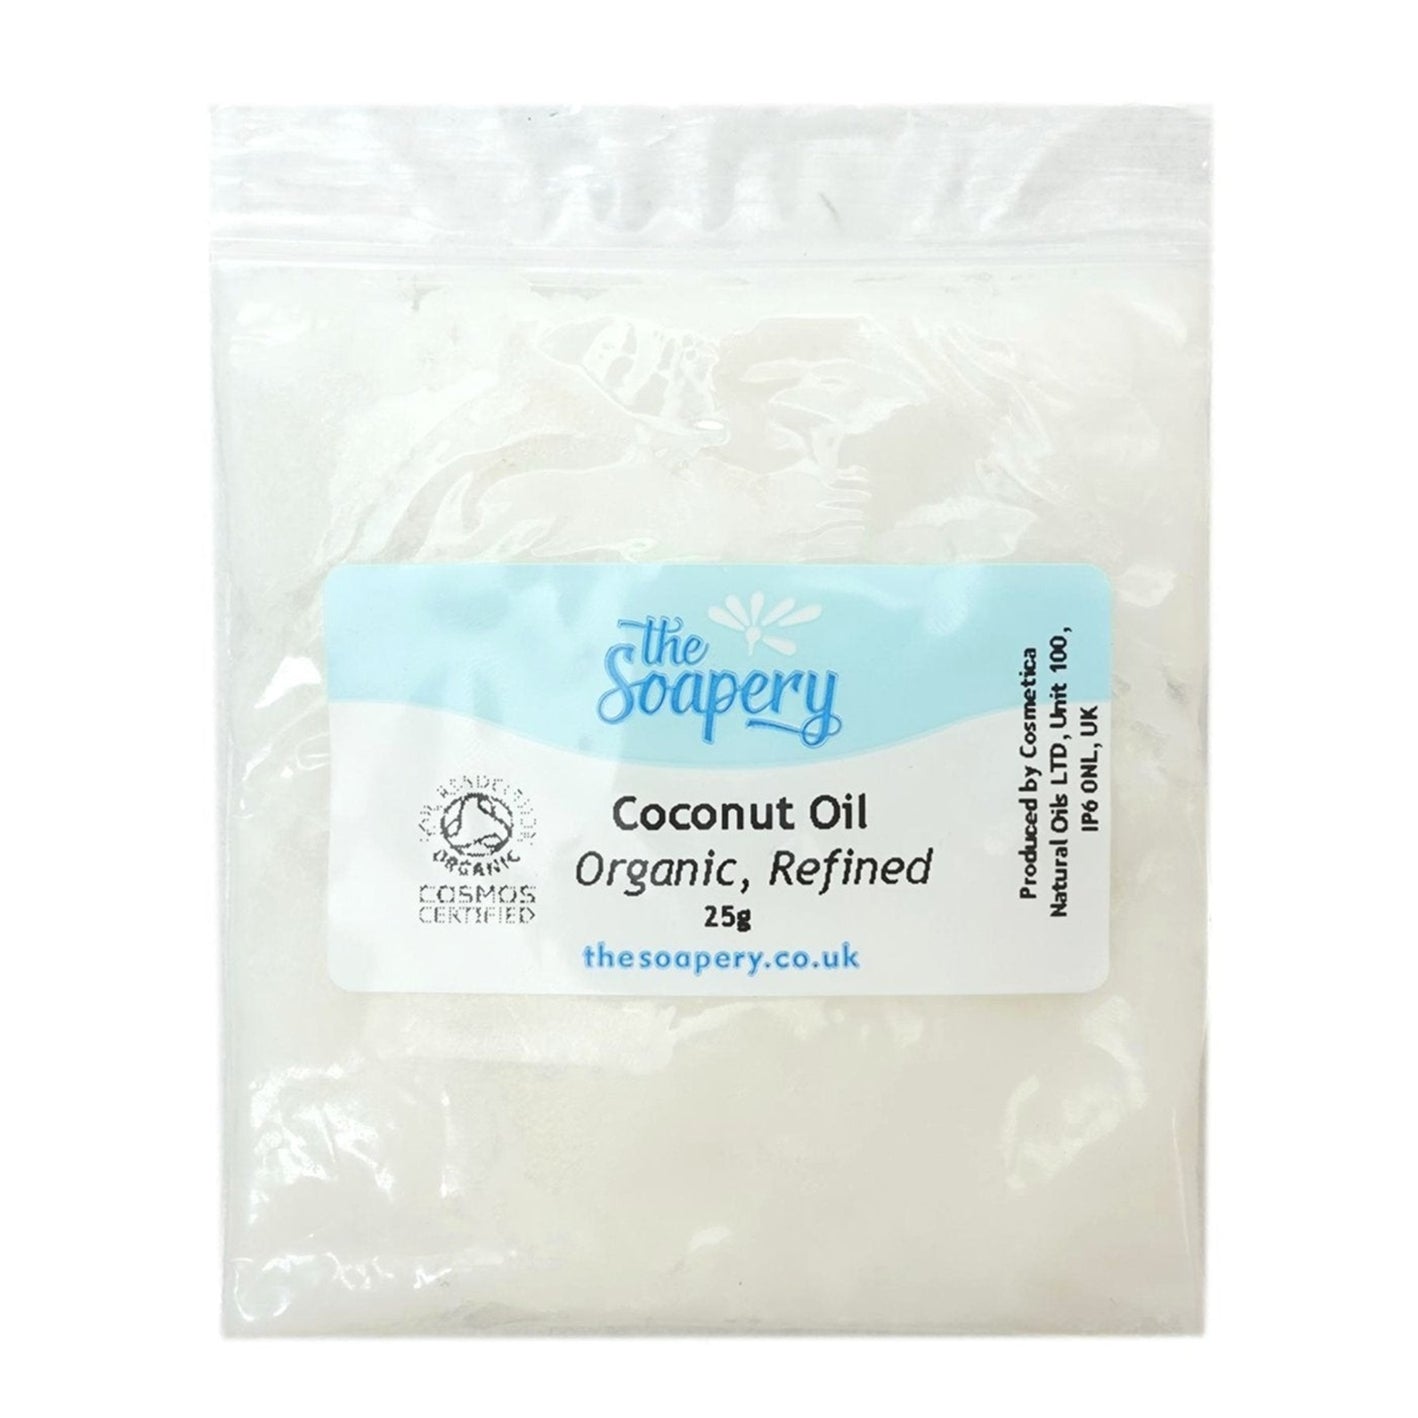 TheSoapery - Brand new on the website this week! Organic virgin